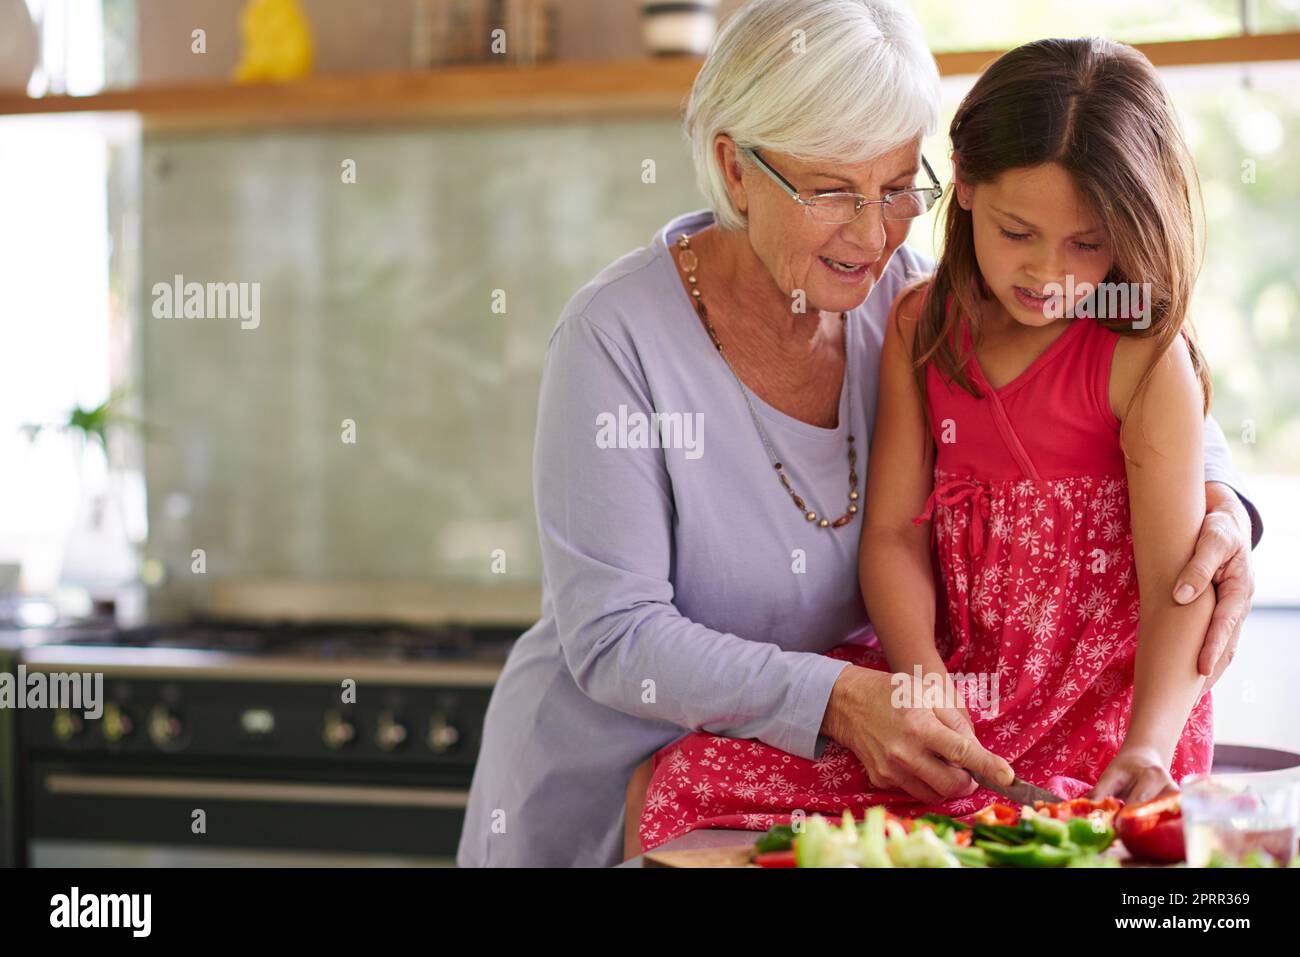 Youre going to be a great cook one day. a little girl helping her grandmother make lunch. Stock Photo